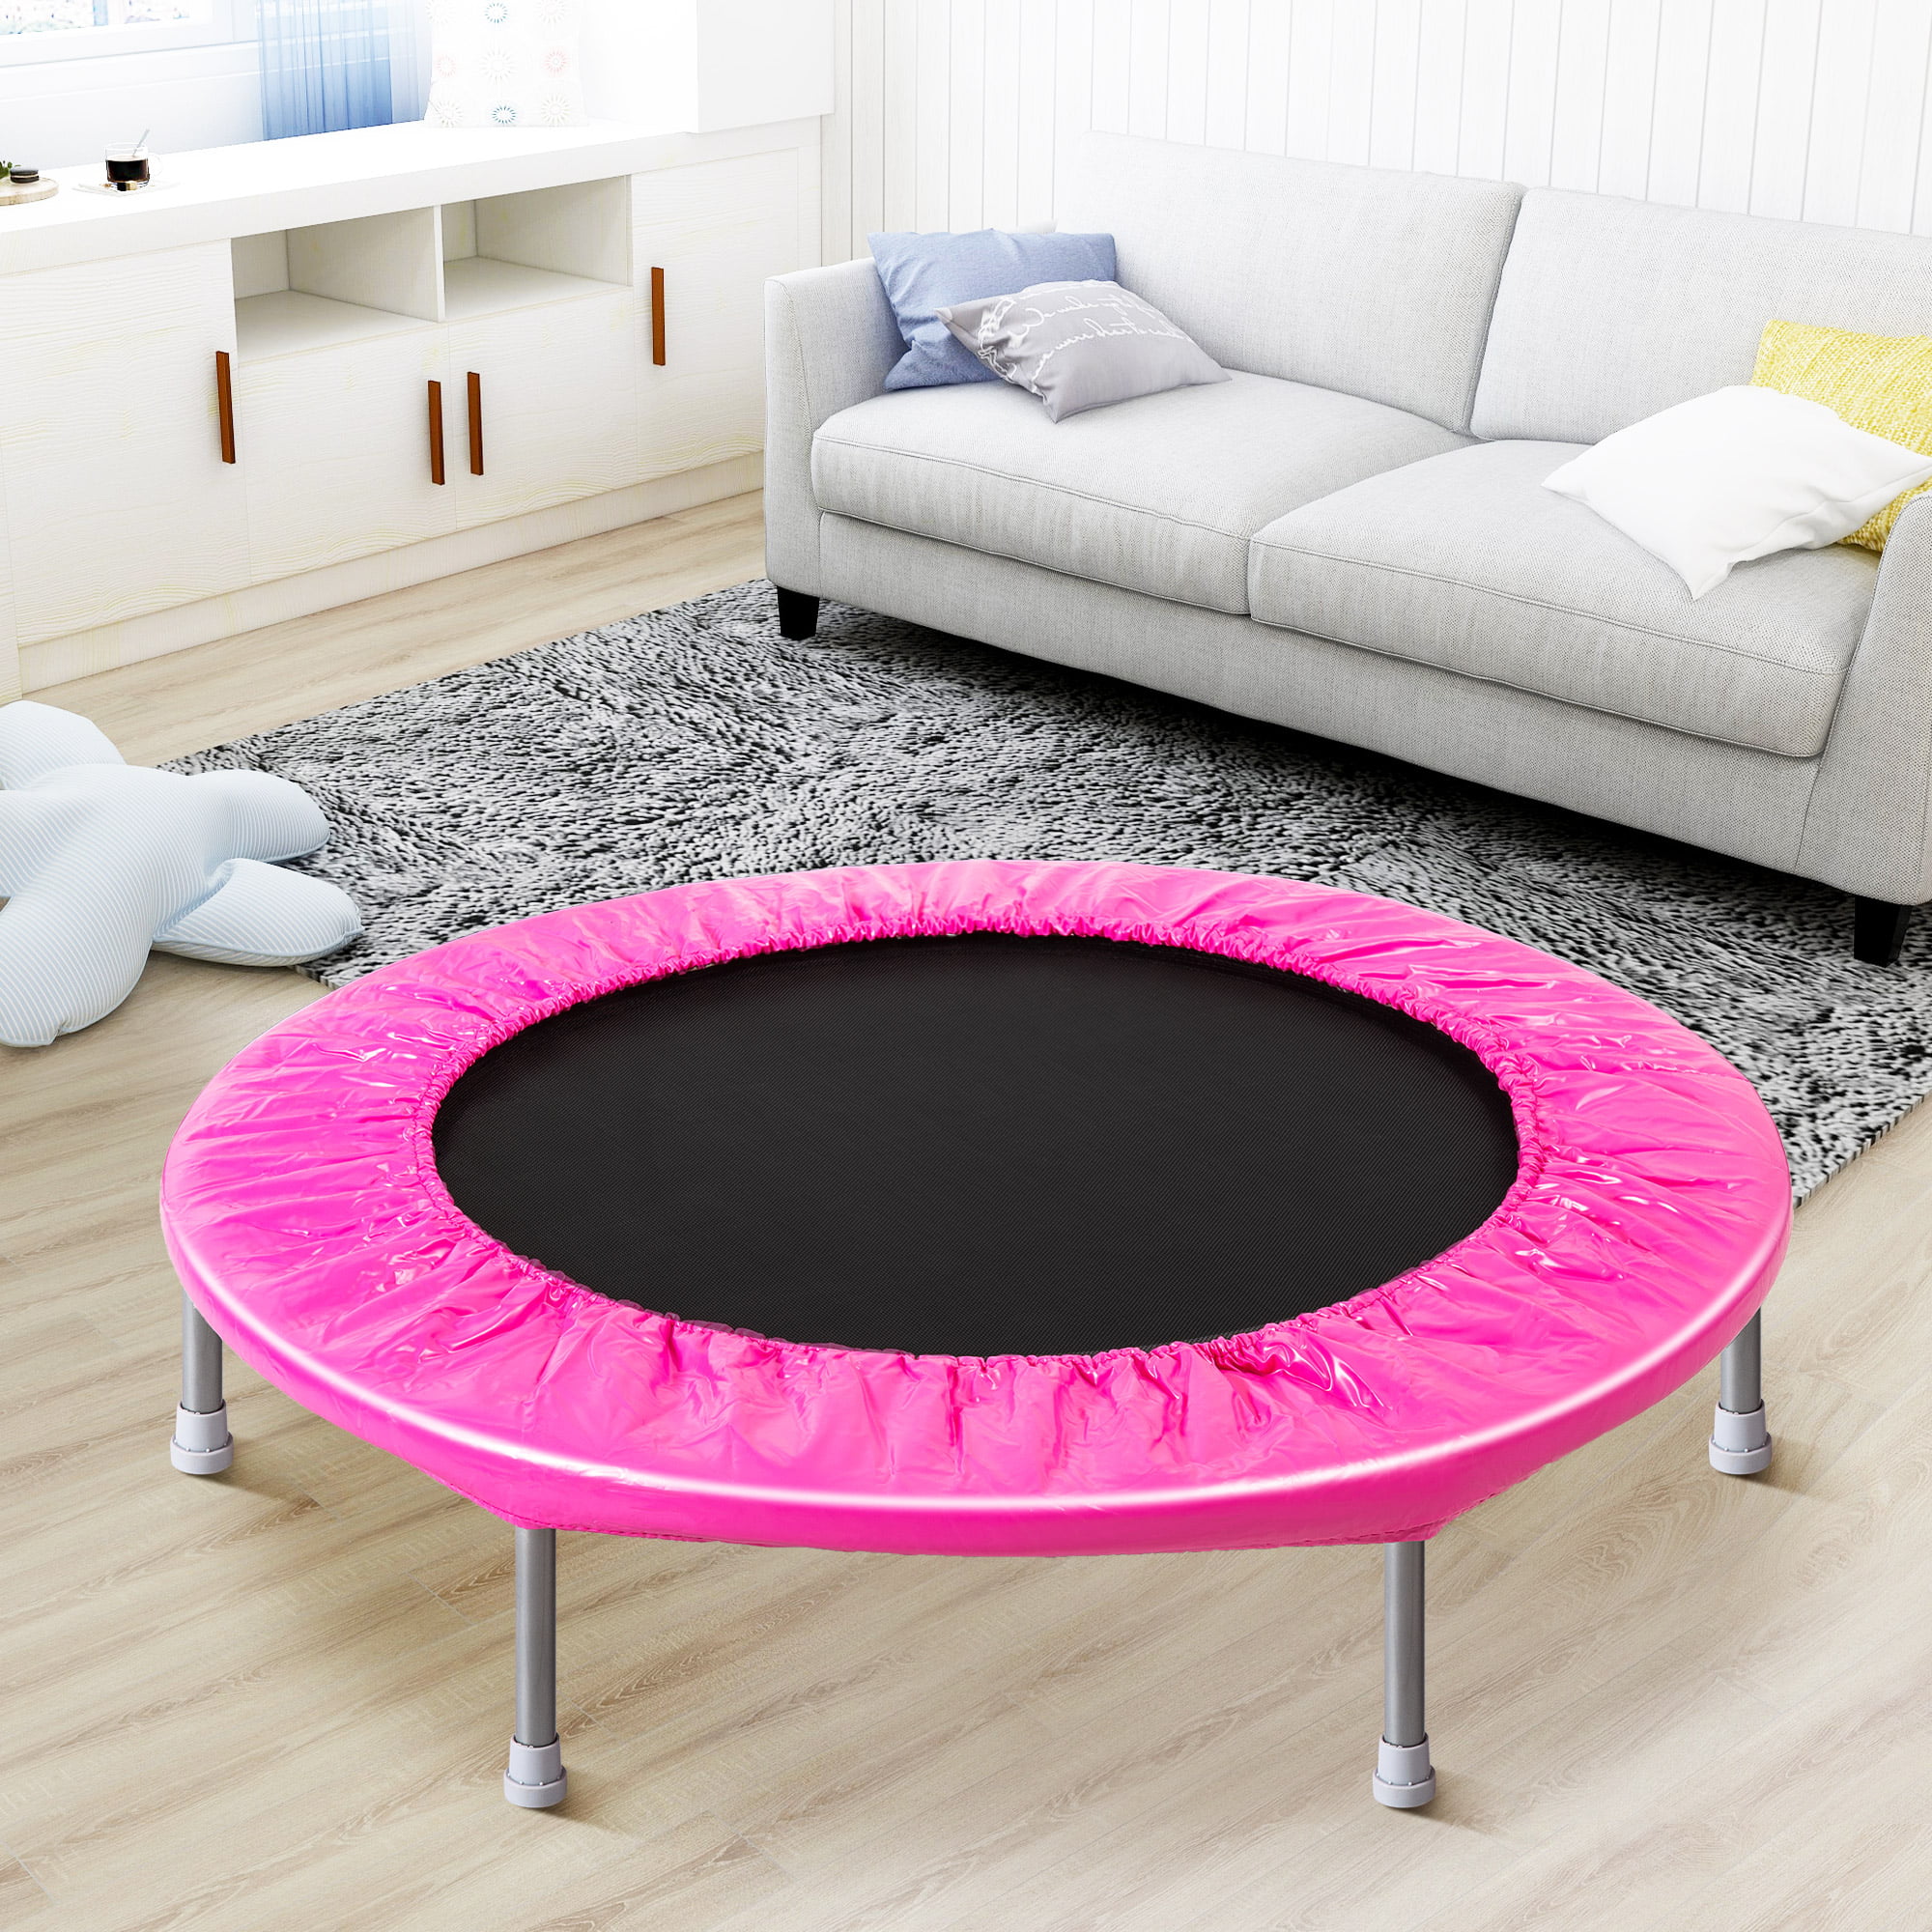 38Inch Trampoline Kids Jump Trampoline Safety Outdoor Indoor Jumping Table Pink 